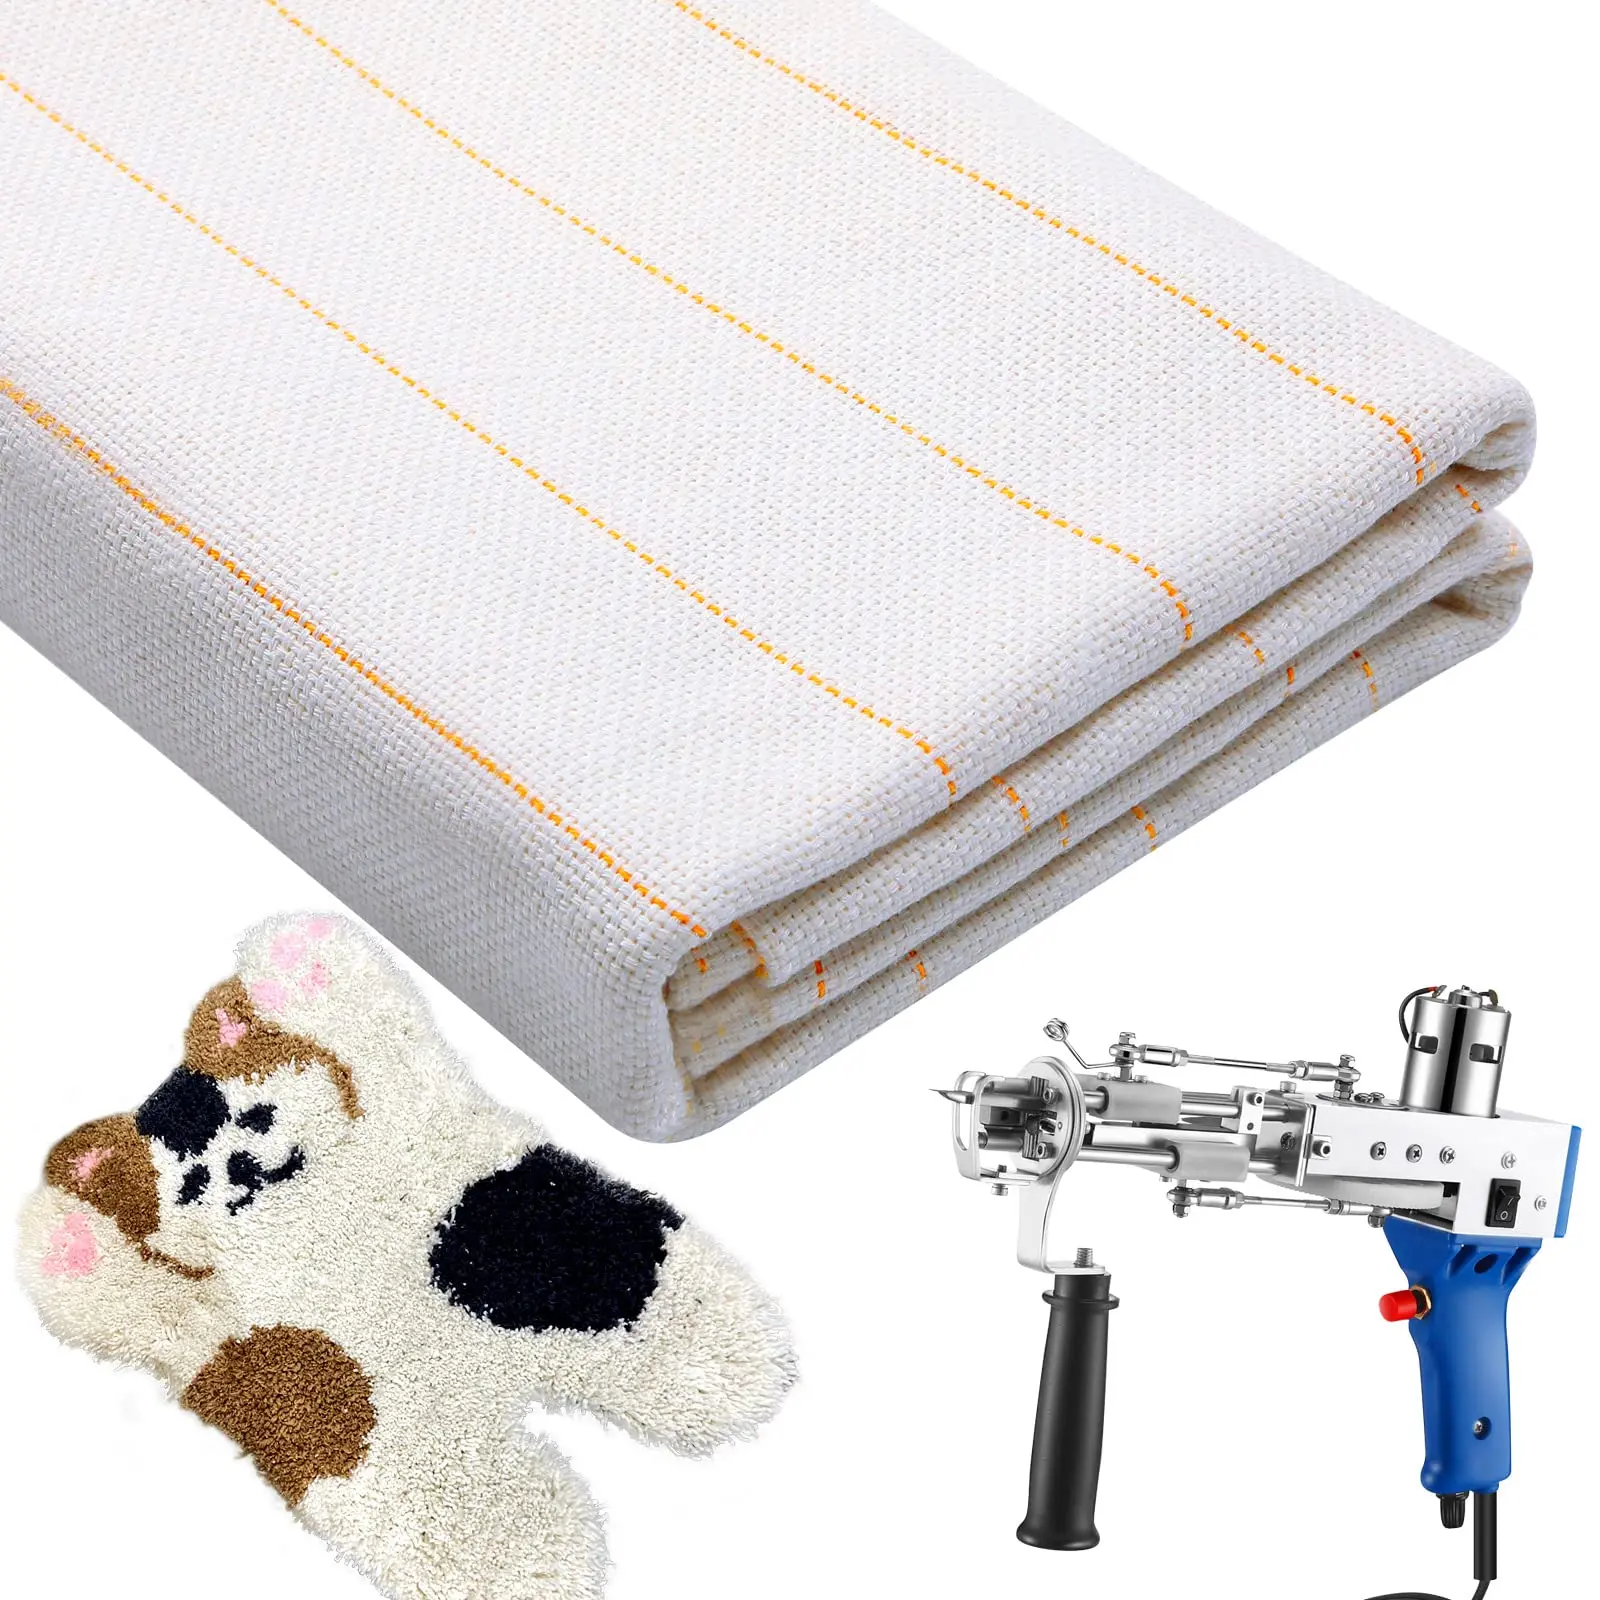 Primary Tufting Cloth Backing Fabric for Carpet Weaving, Knitting Material, Rug  Tufting Gun, Embroidery Fabric, 1.5*10m - AliExpress